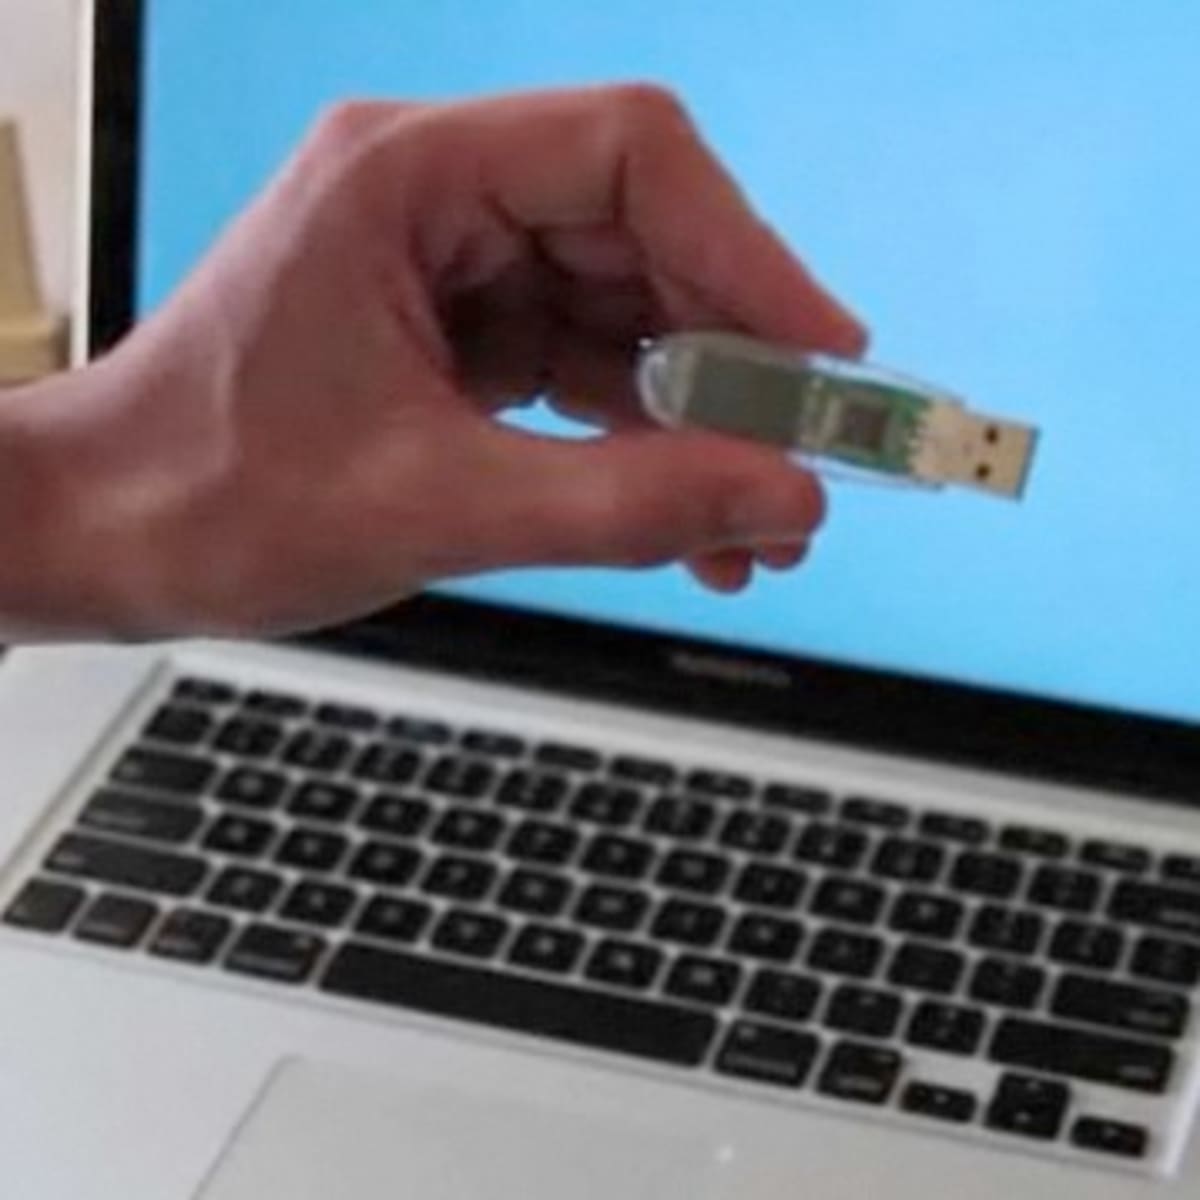 How to Use a Flash Drive or Memory Stick 